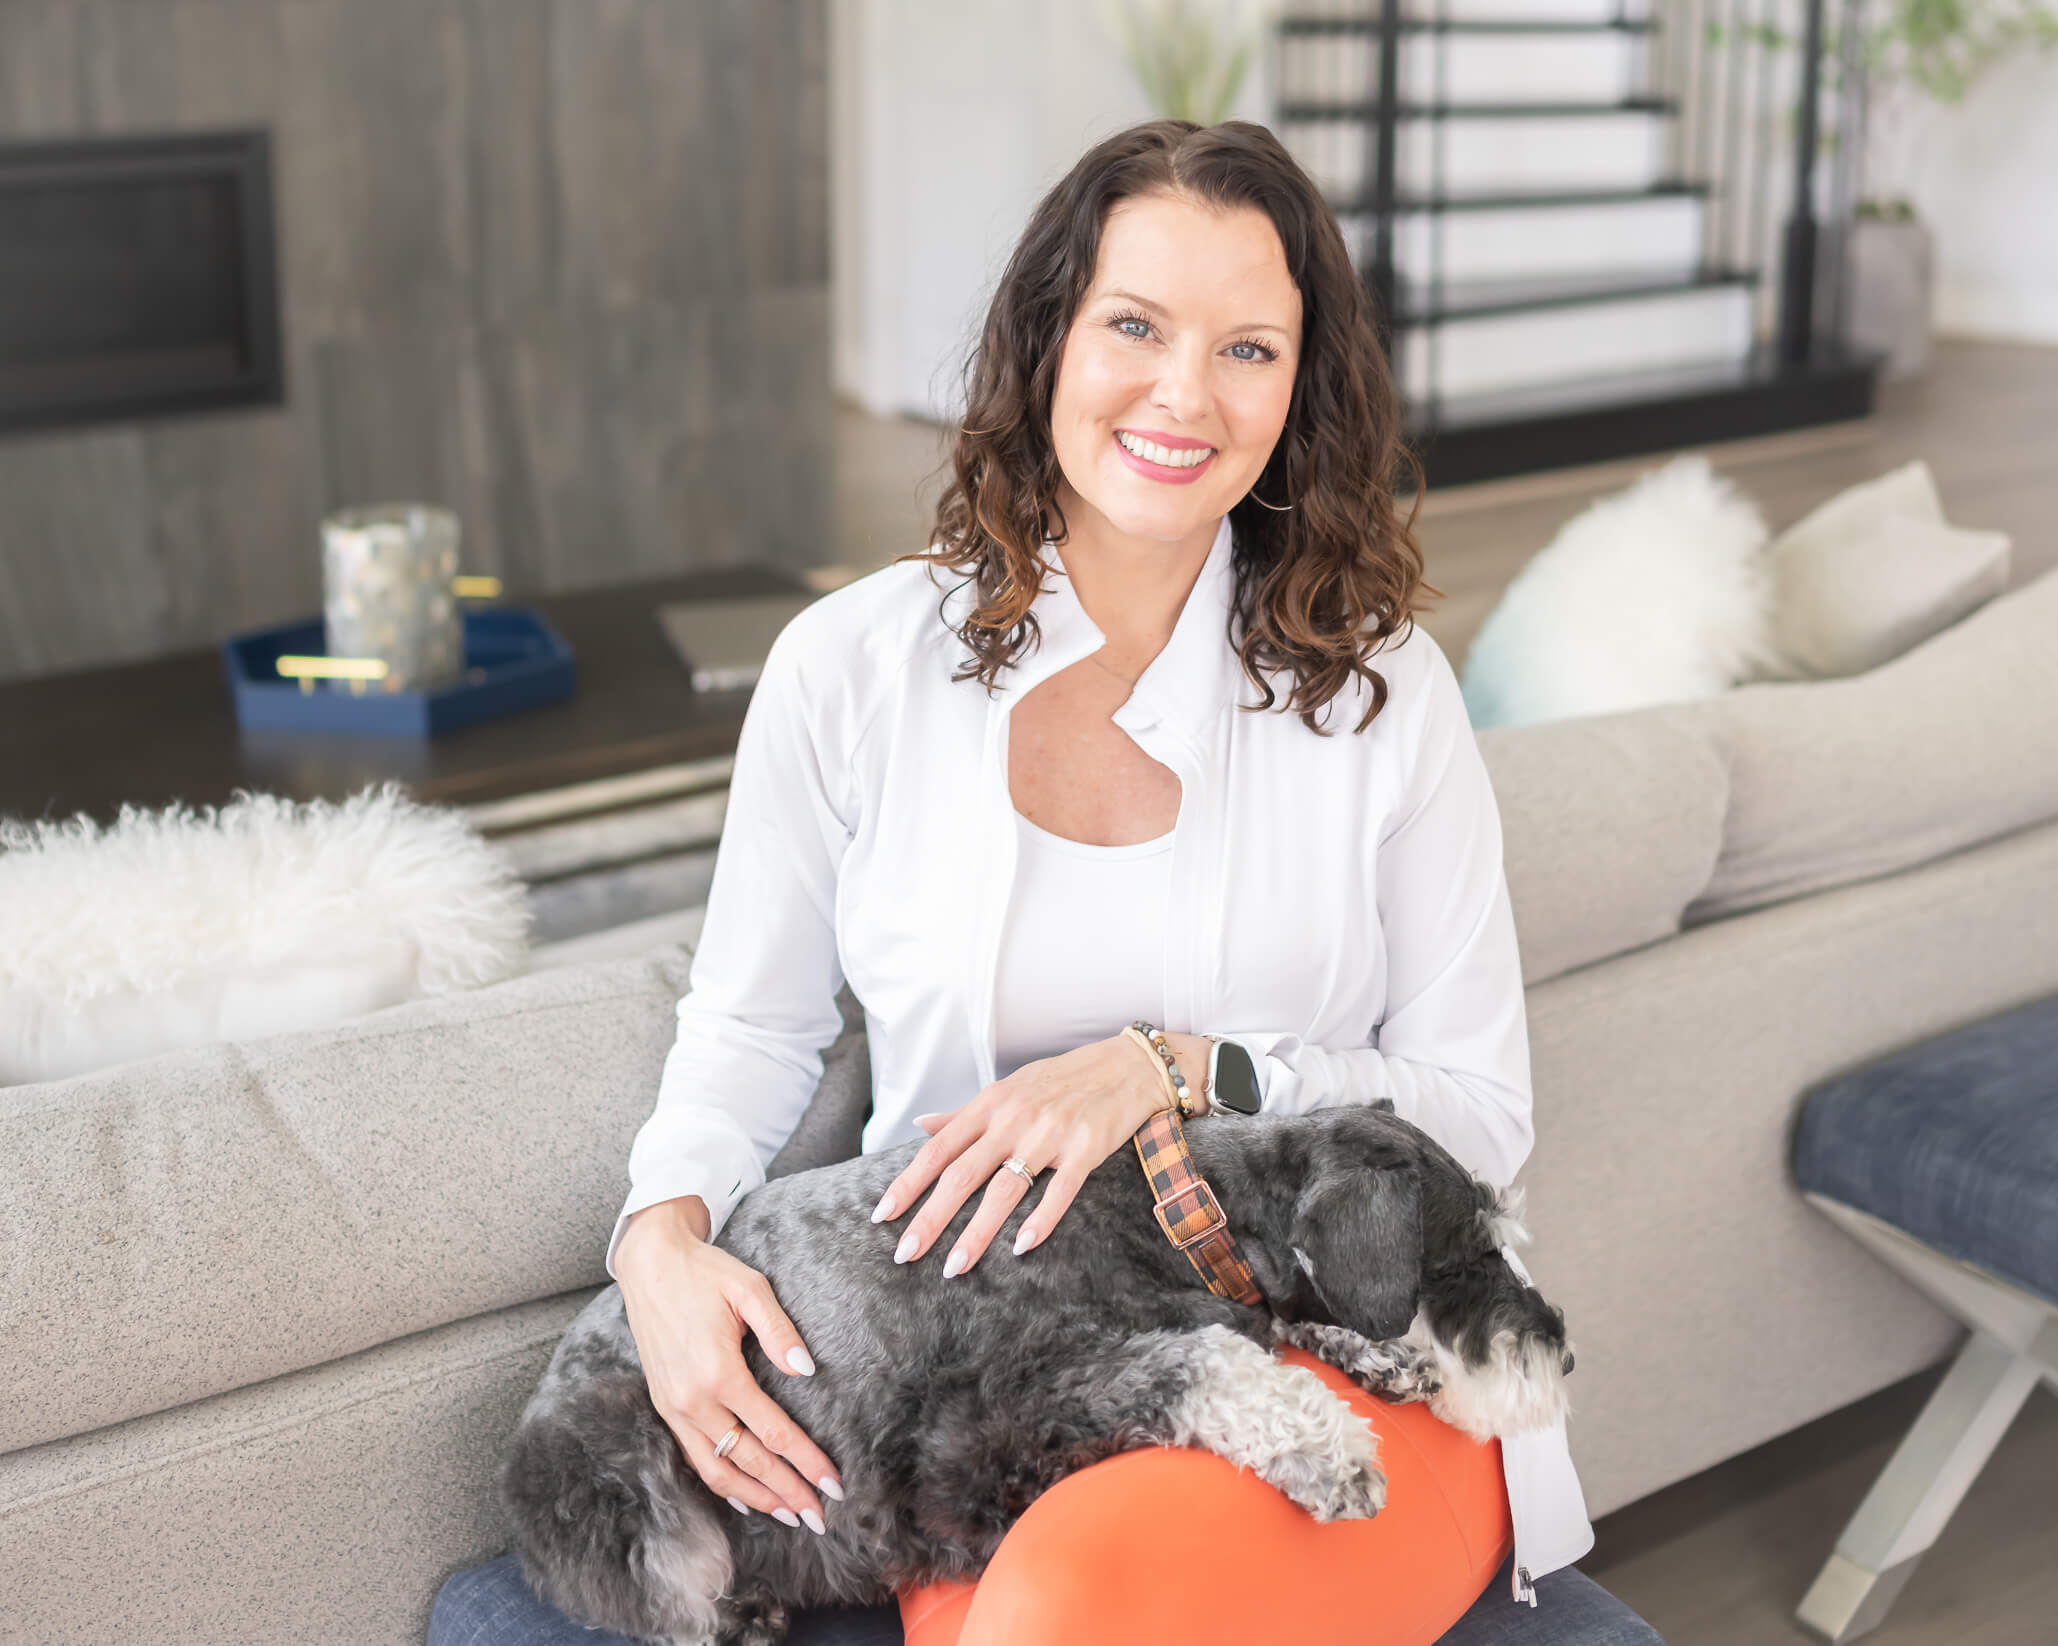 attractive woman business owner branding photo in her home in athletic wear with her dog on her lap